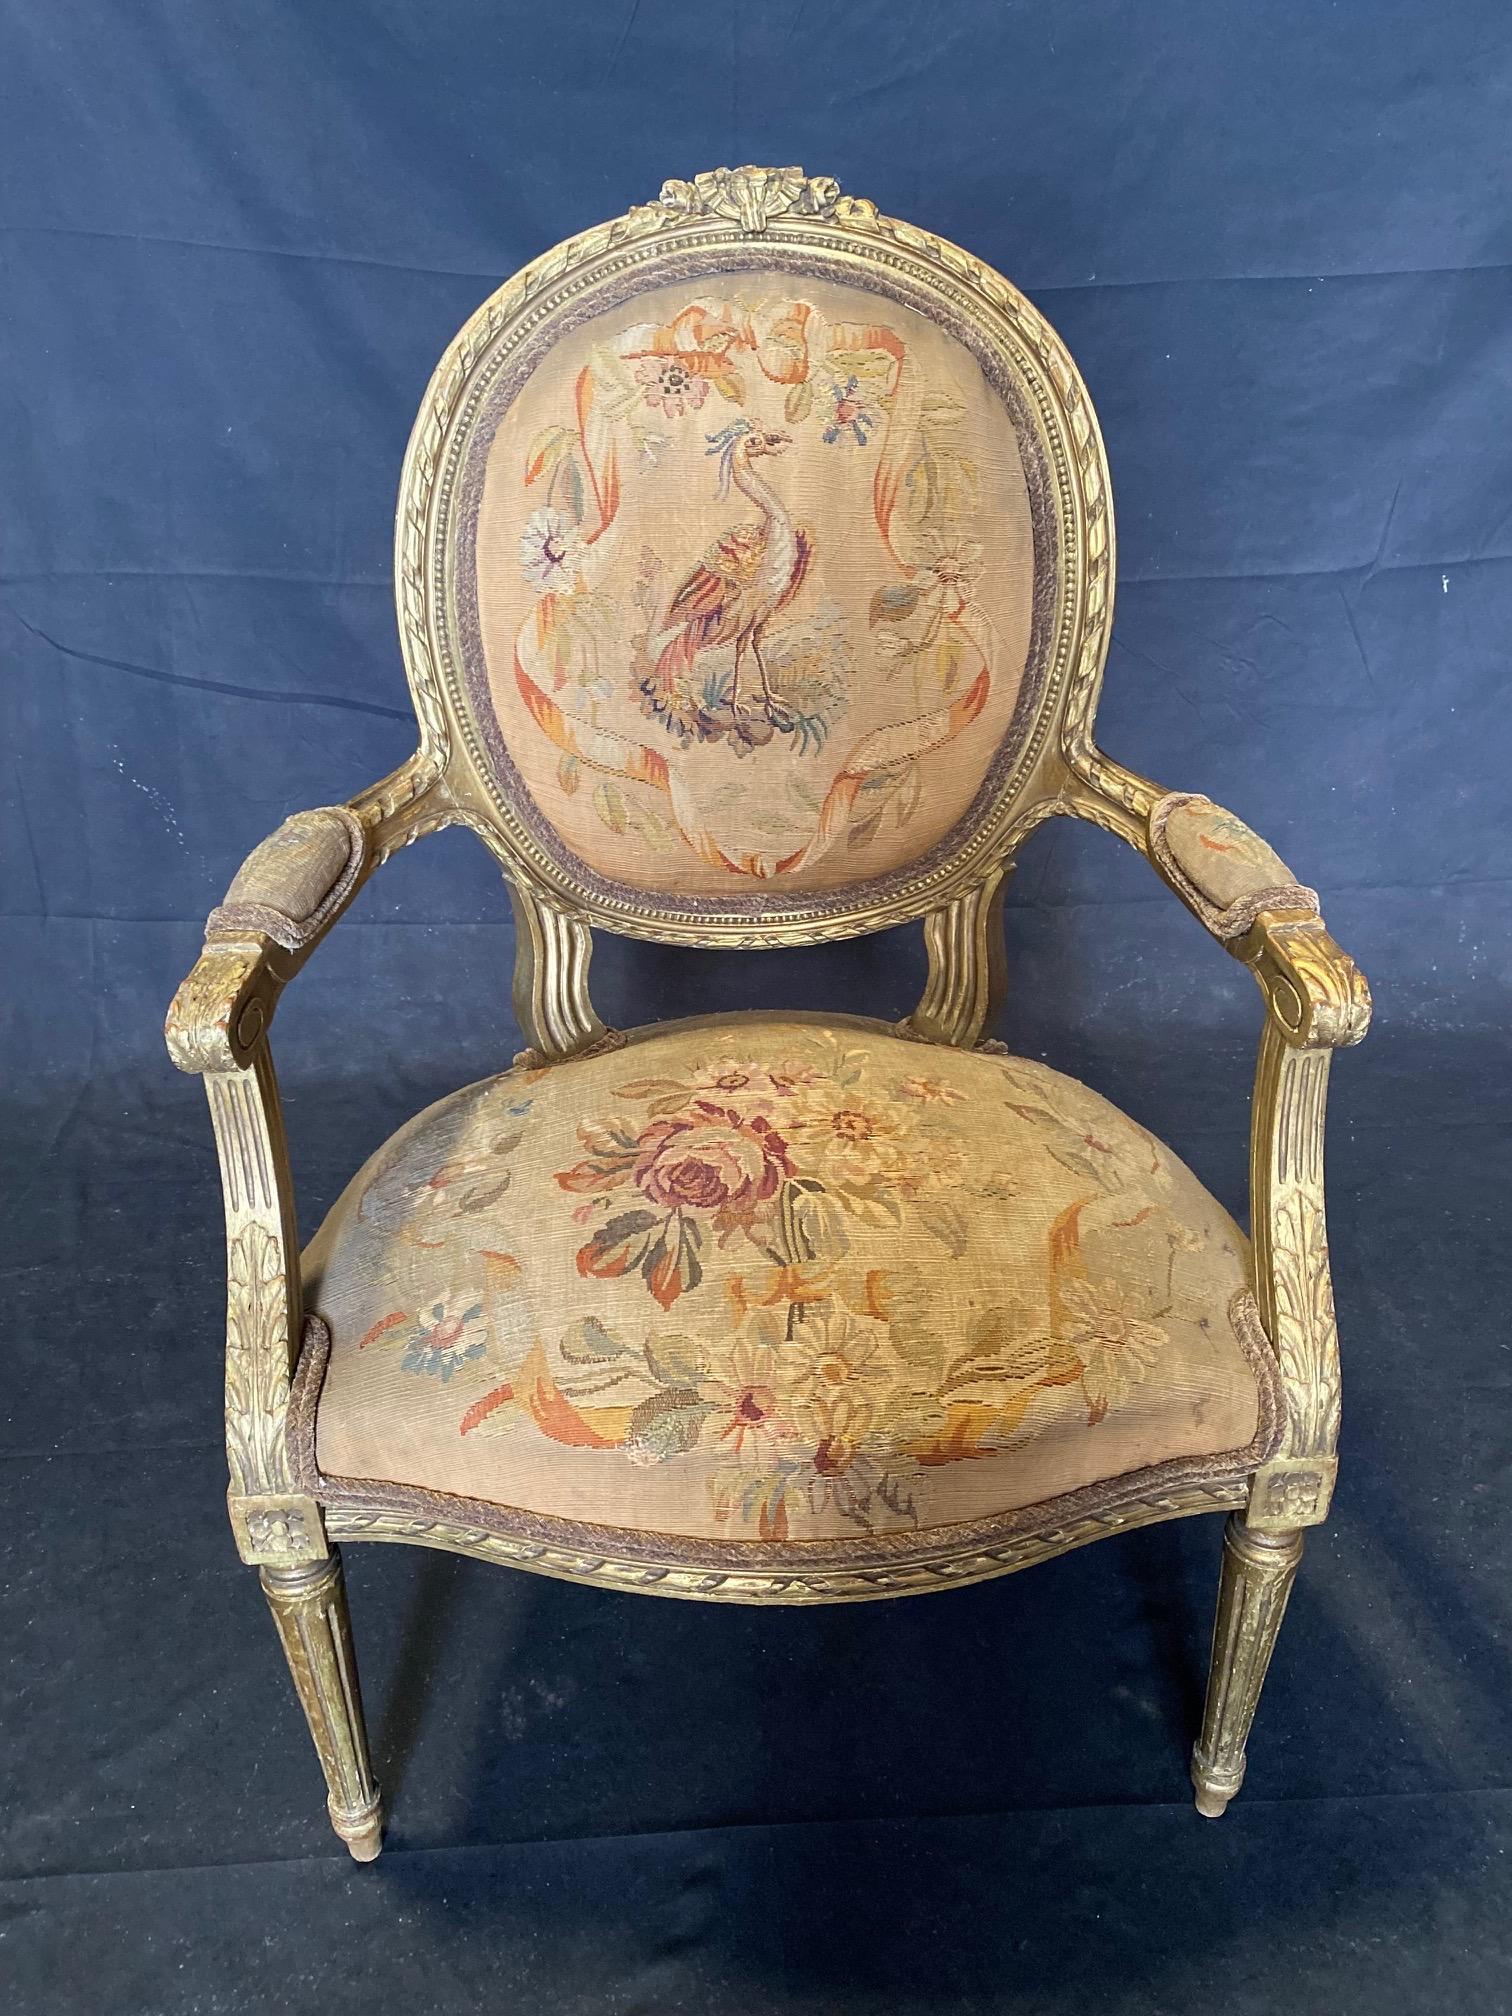 Upholstered in fine Aubusson tapestry fabric, this pair of early 19th century French Louis XVI matching armchairs or fauteuils  have carved giltwood  frames and finely woven Aubusson tapestry upholstery playfully illustrated with bird scenes and